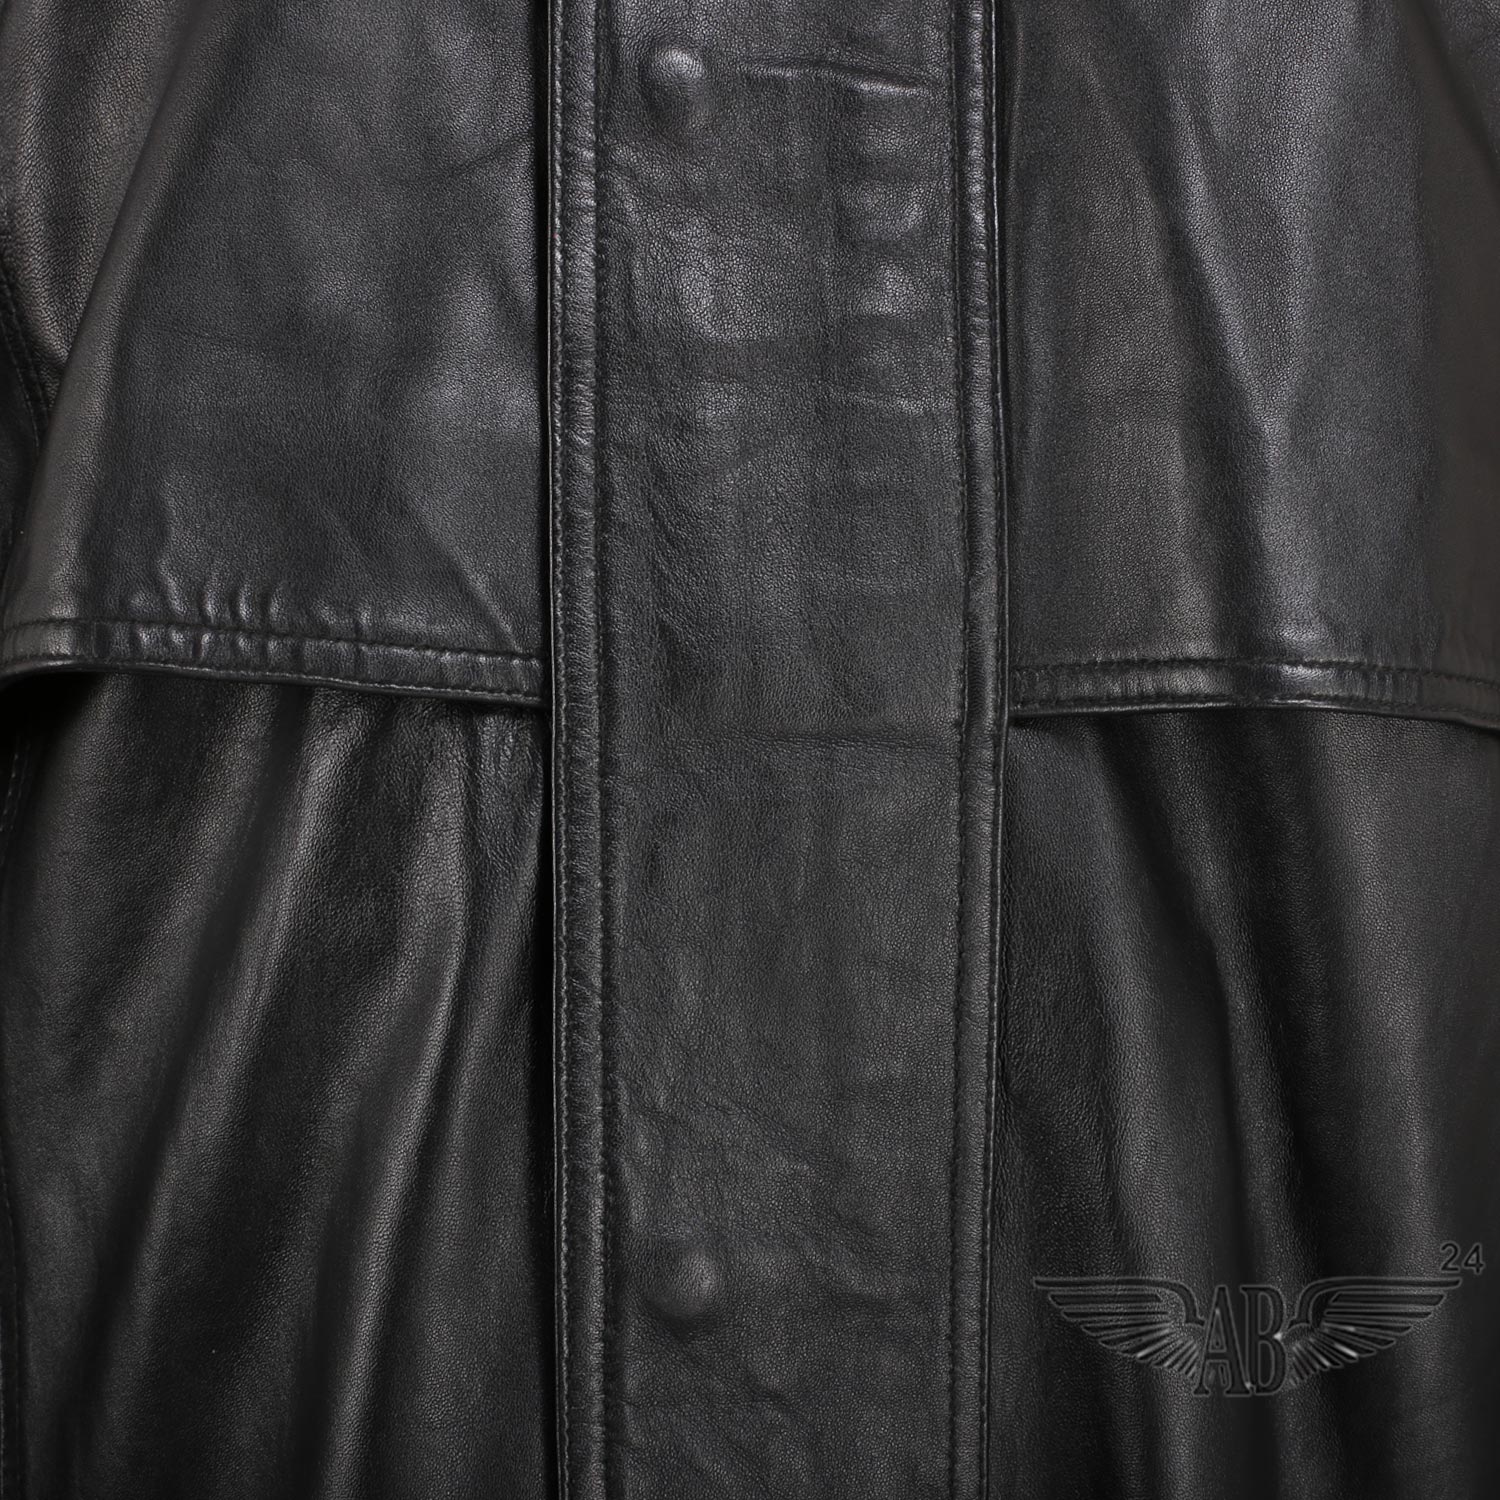 Close view of black TRENCH COAT, It is neatly buttoned